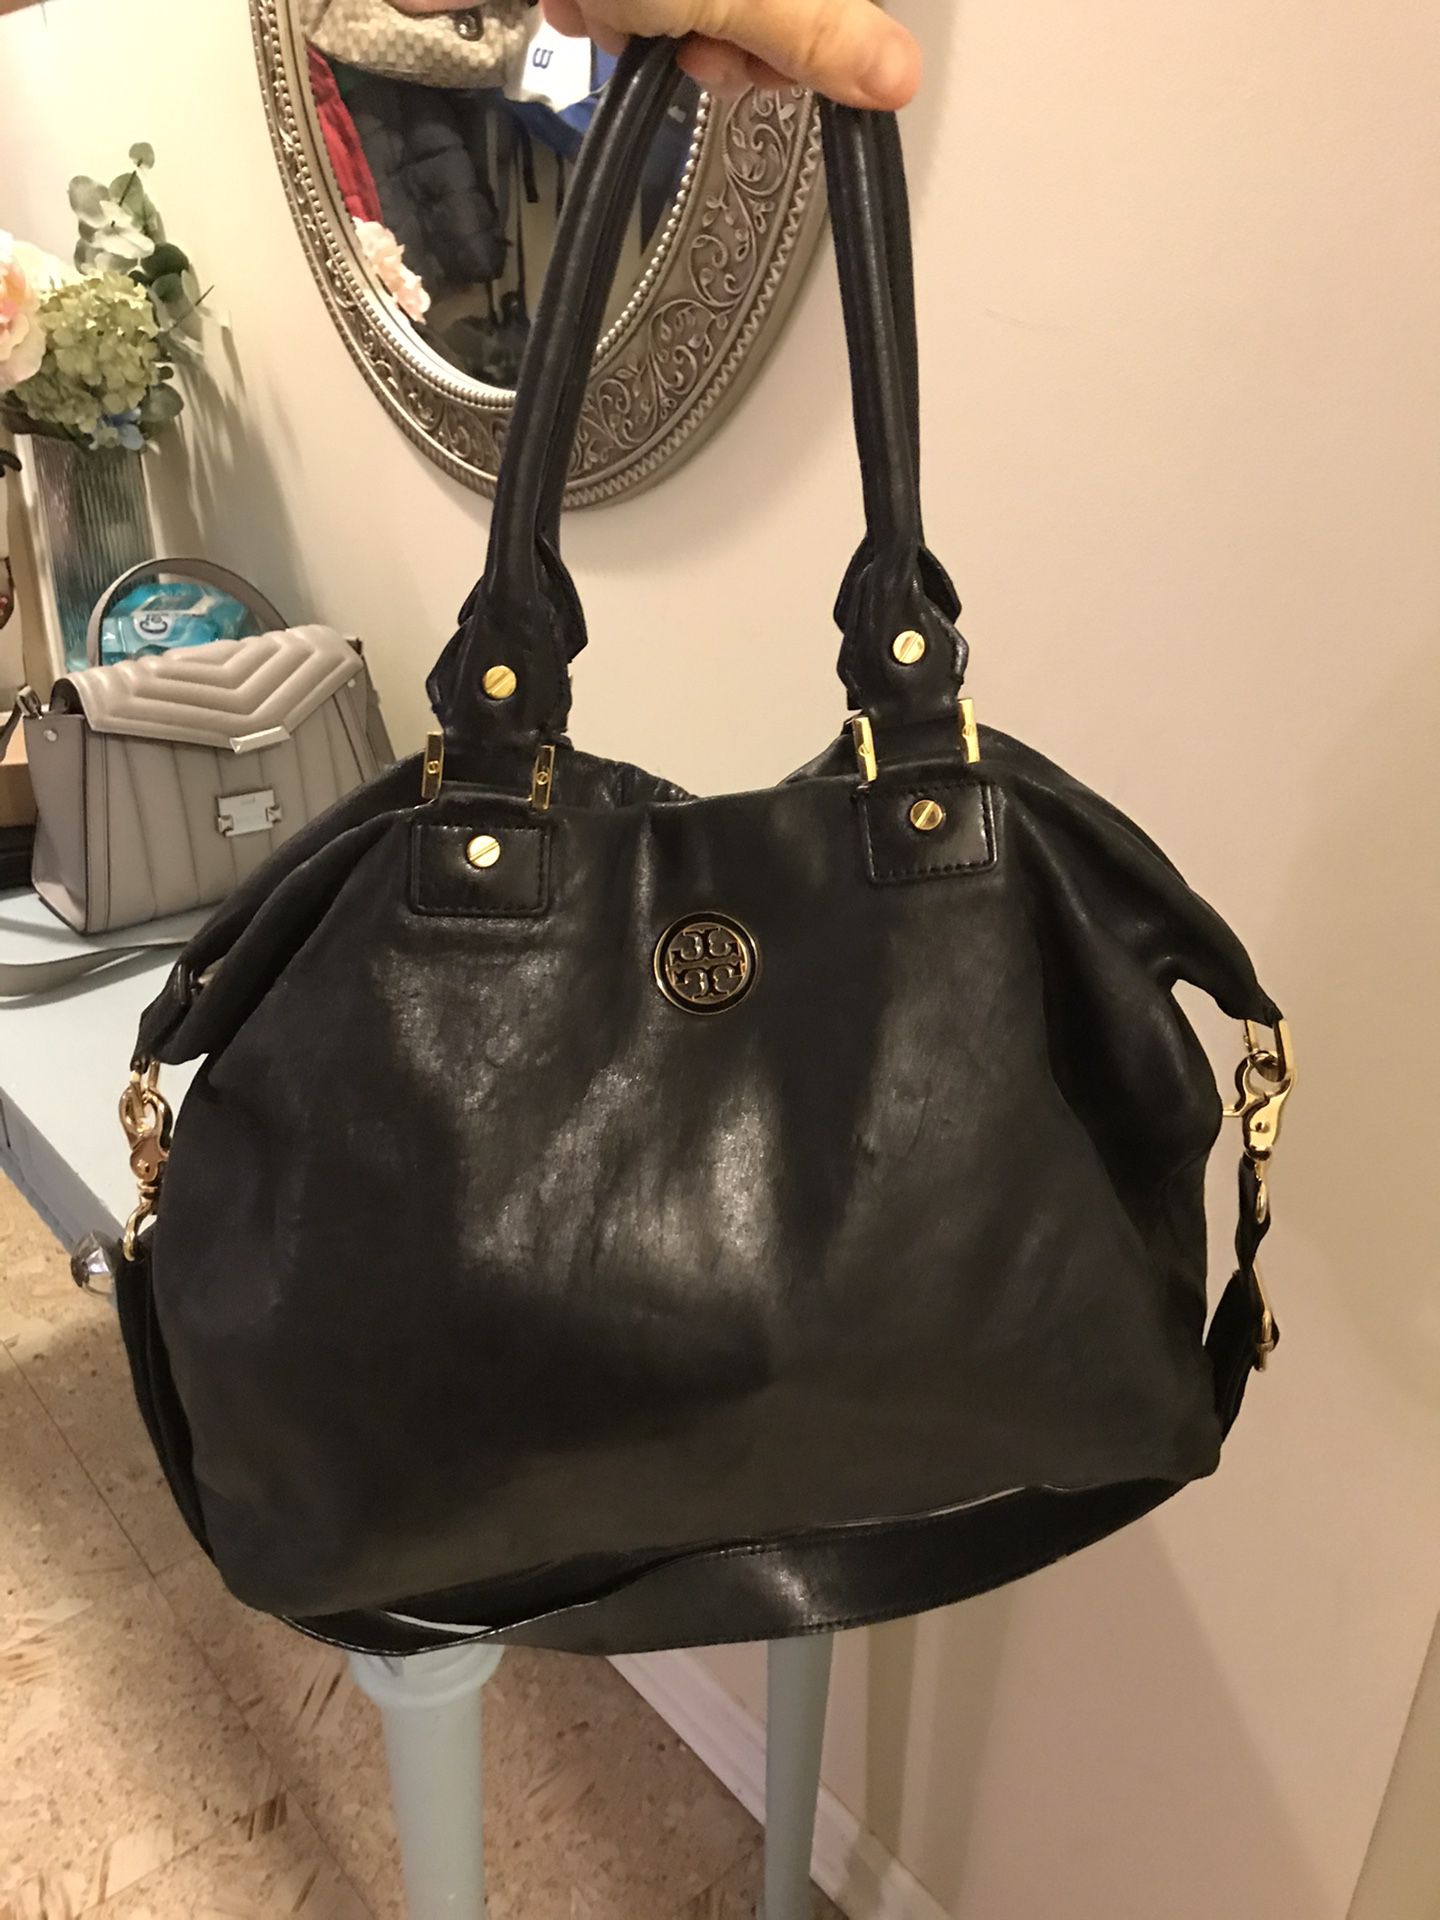 Authentic Tory Burch tote bag